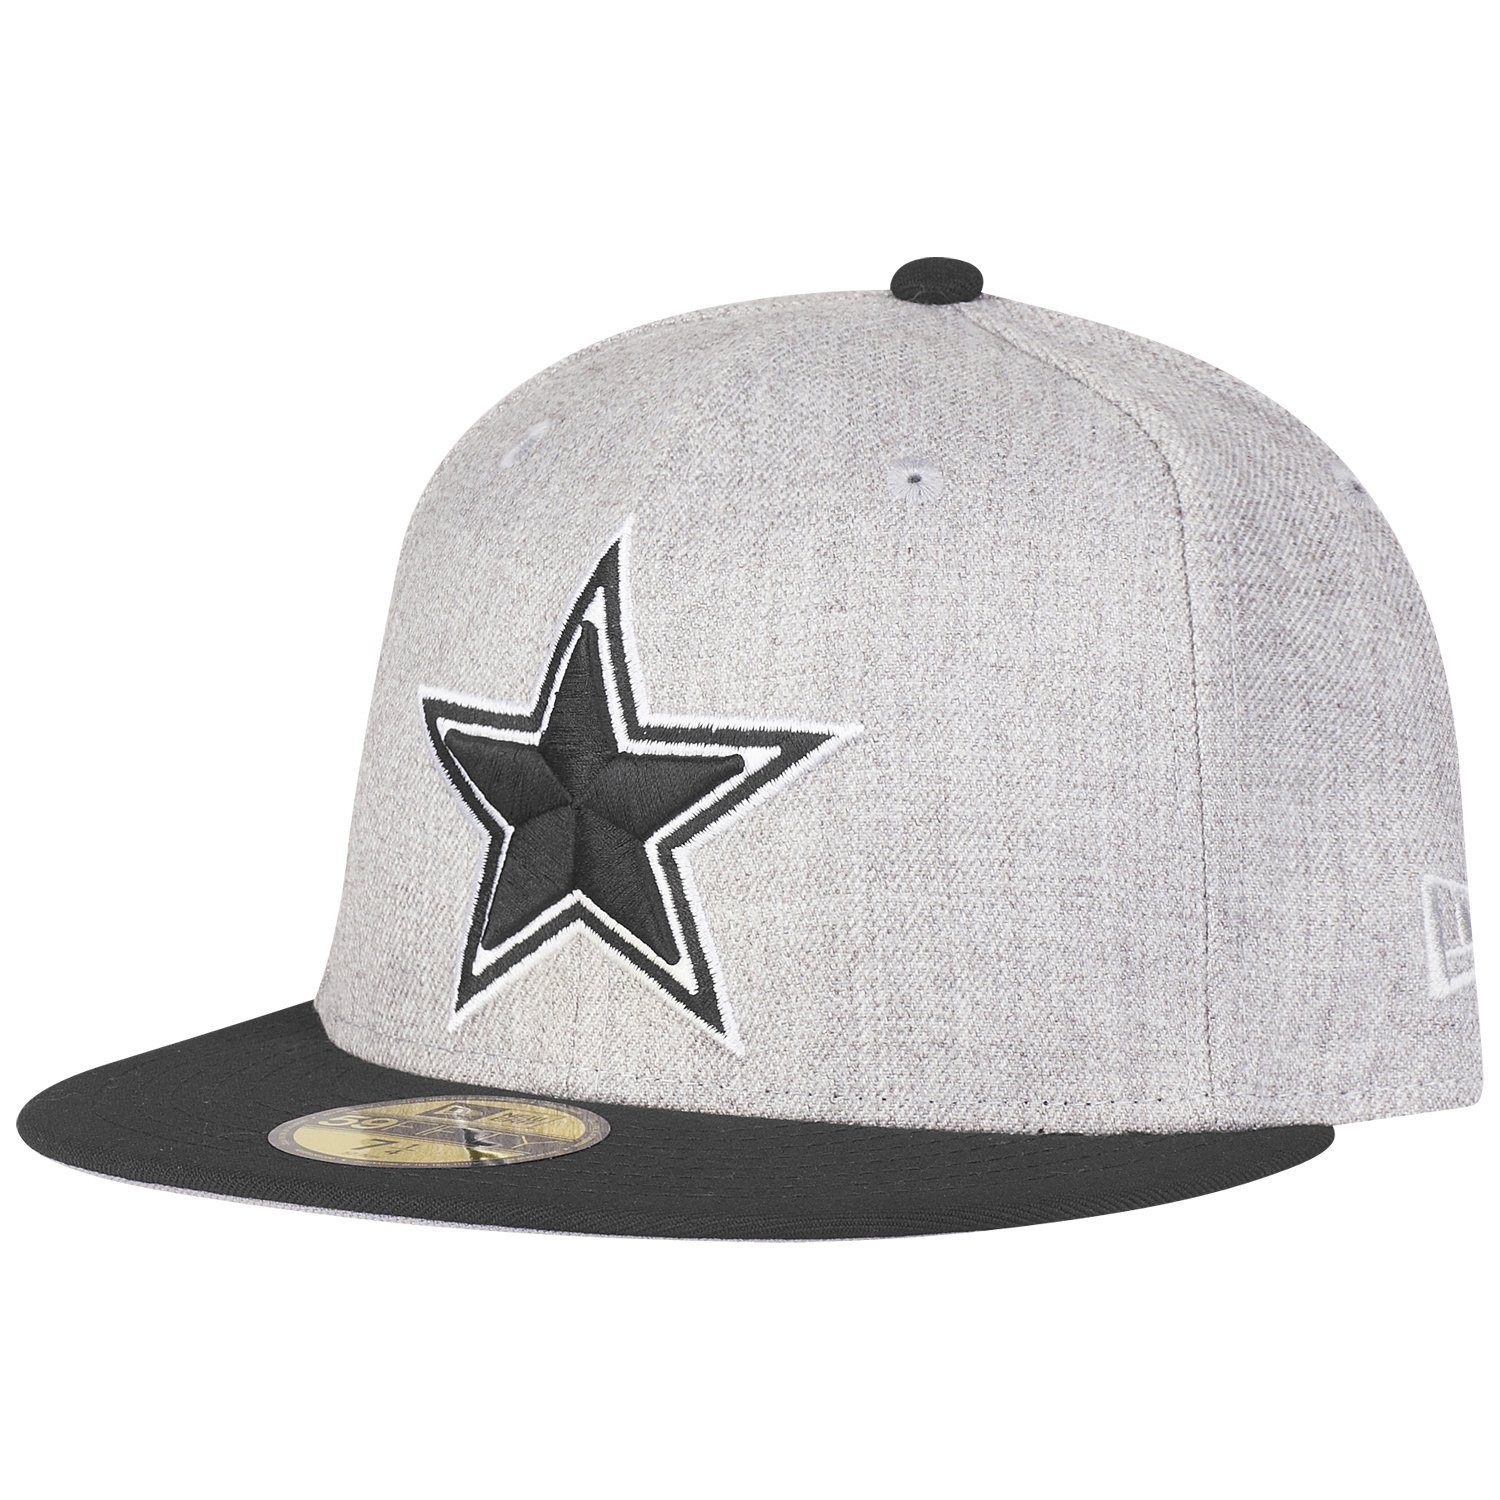 HEATHER New Cap Fitted Dallas Cowboys 59Fifty Era